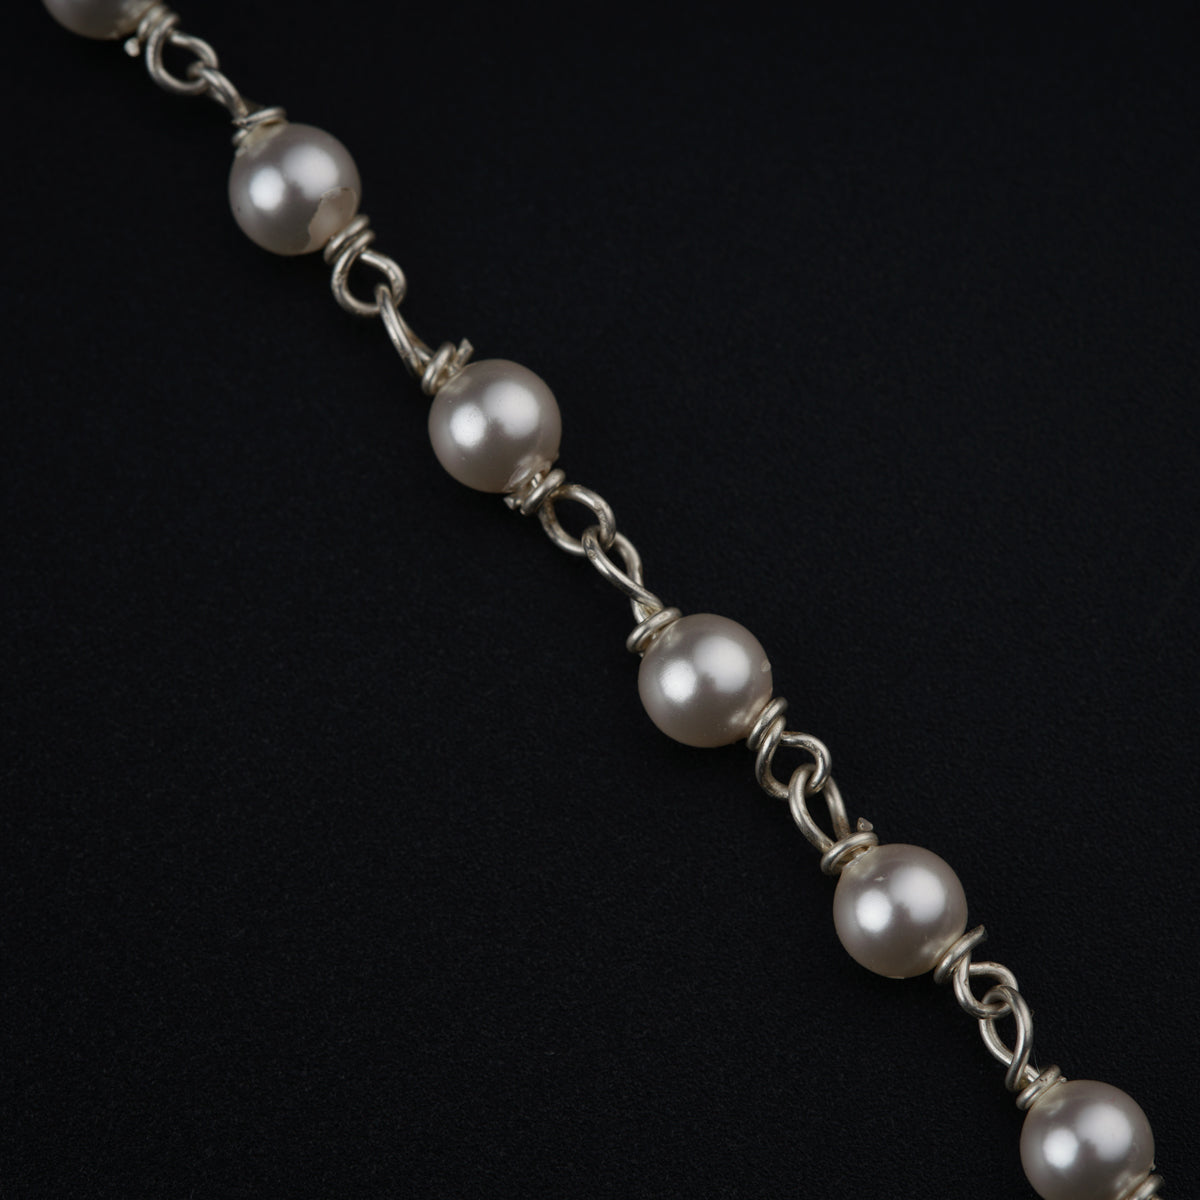 a silver bracelet with pearls on a black background